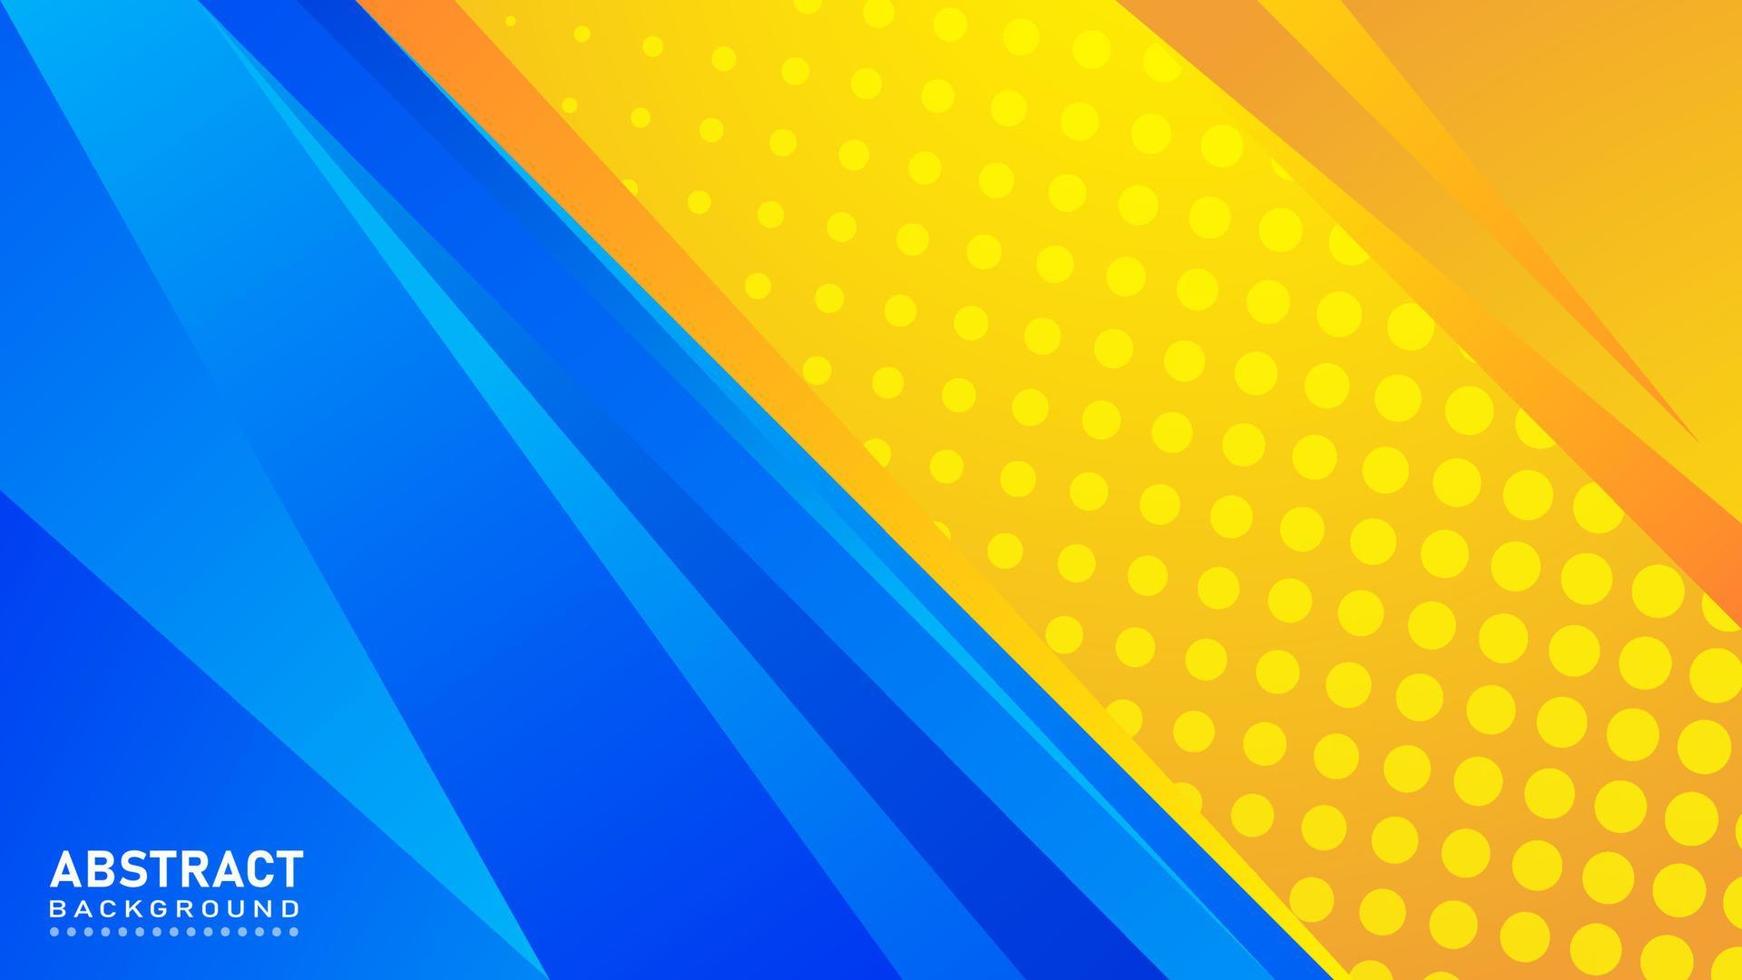 Blue and yellow geometric gradient background with abstract elements vector